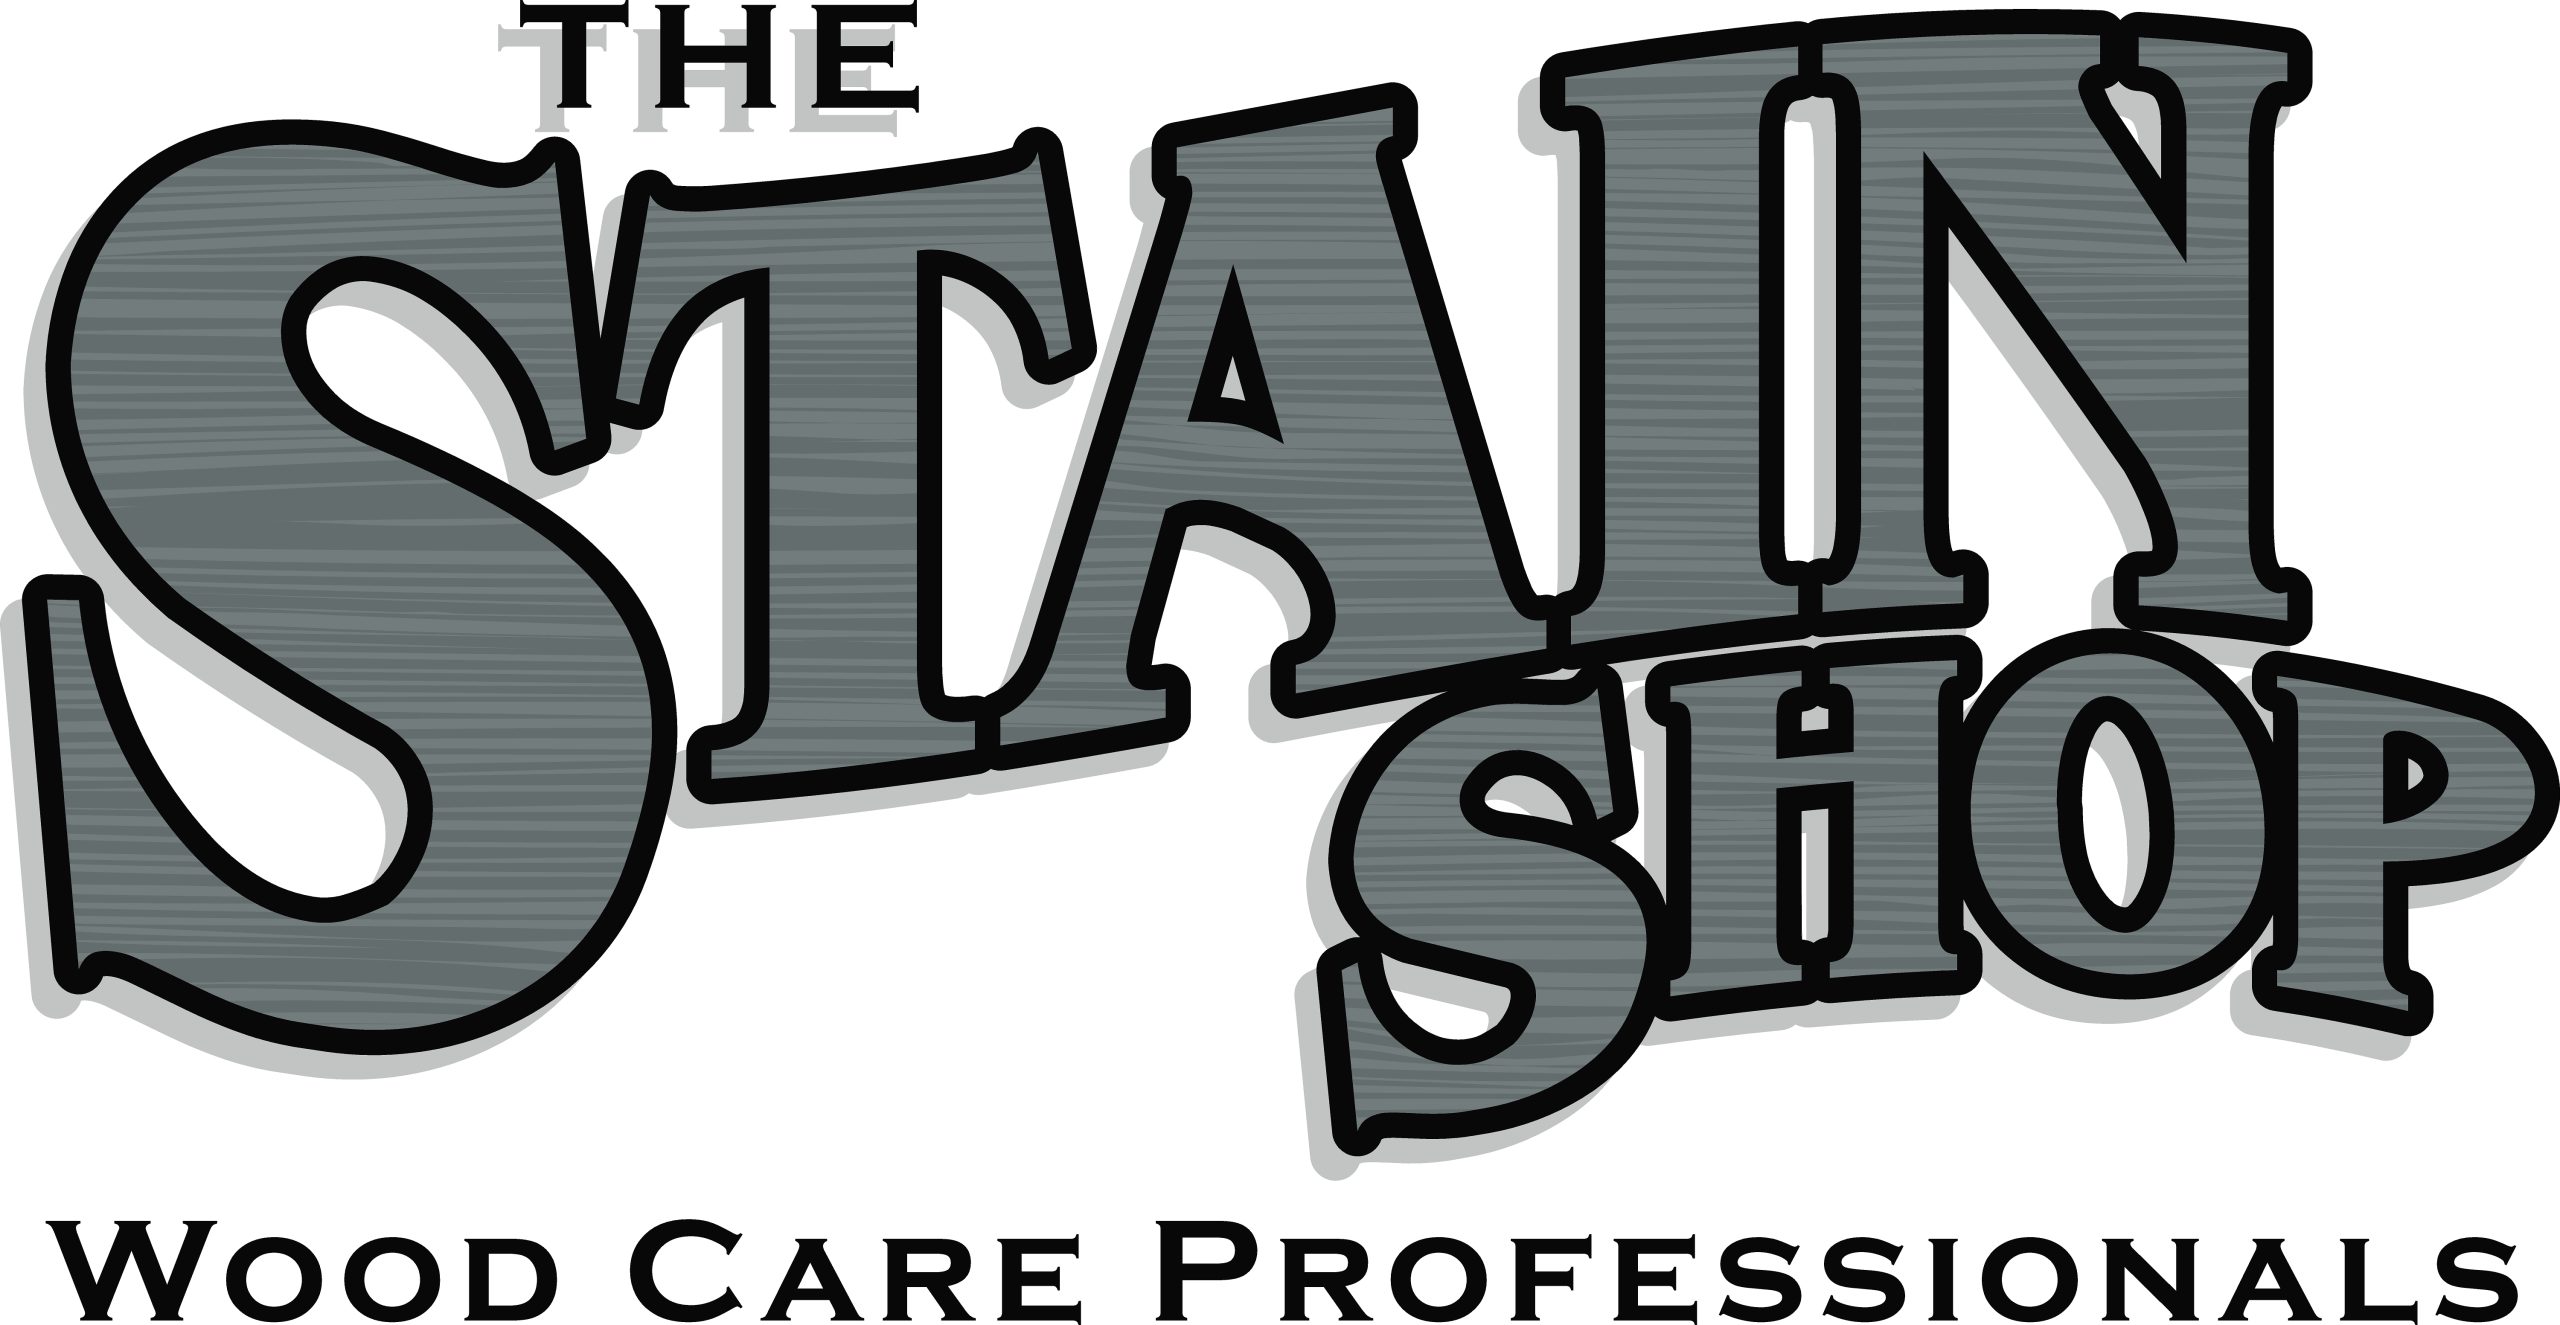 The Stain Shop logo